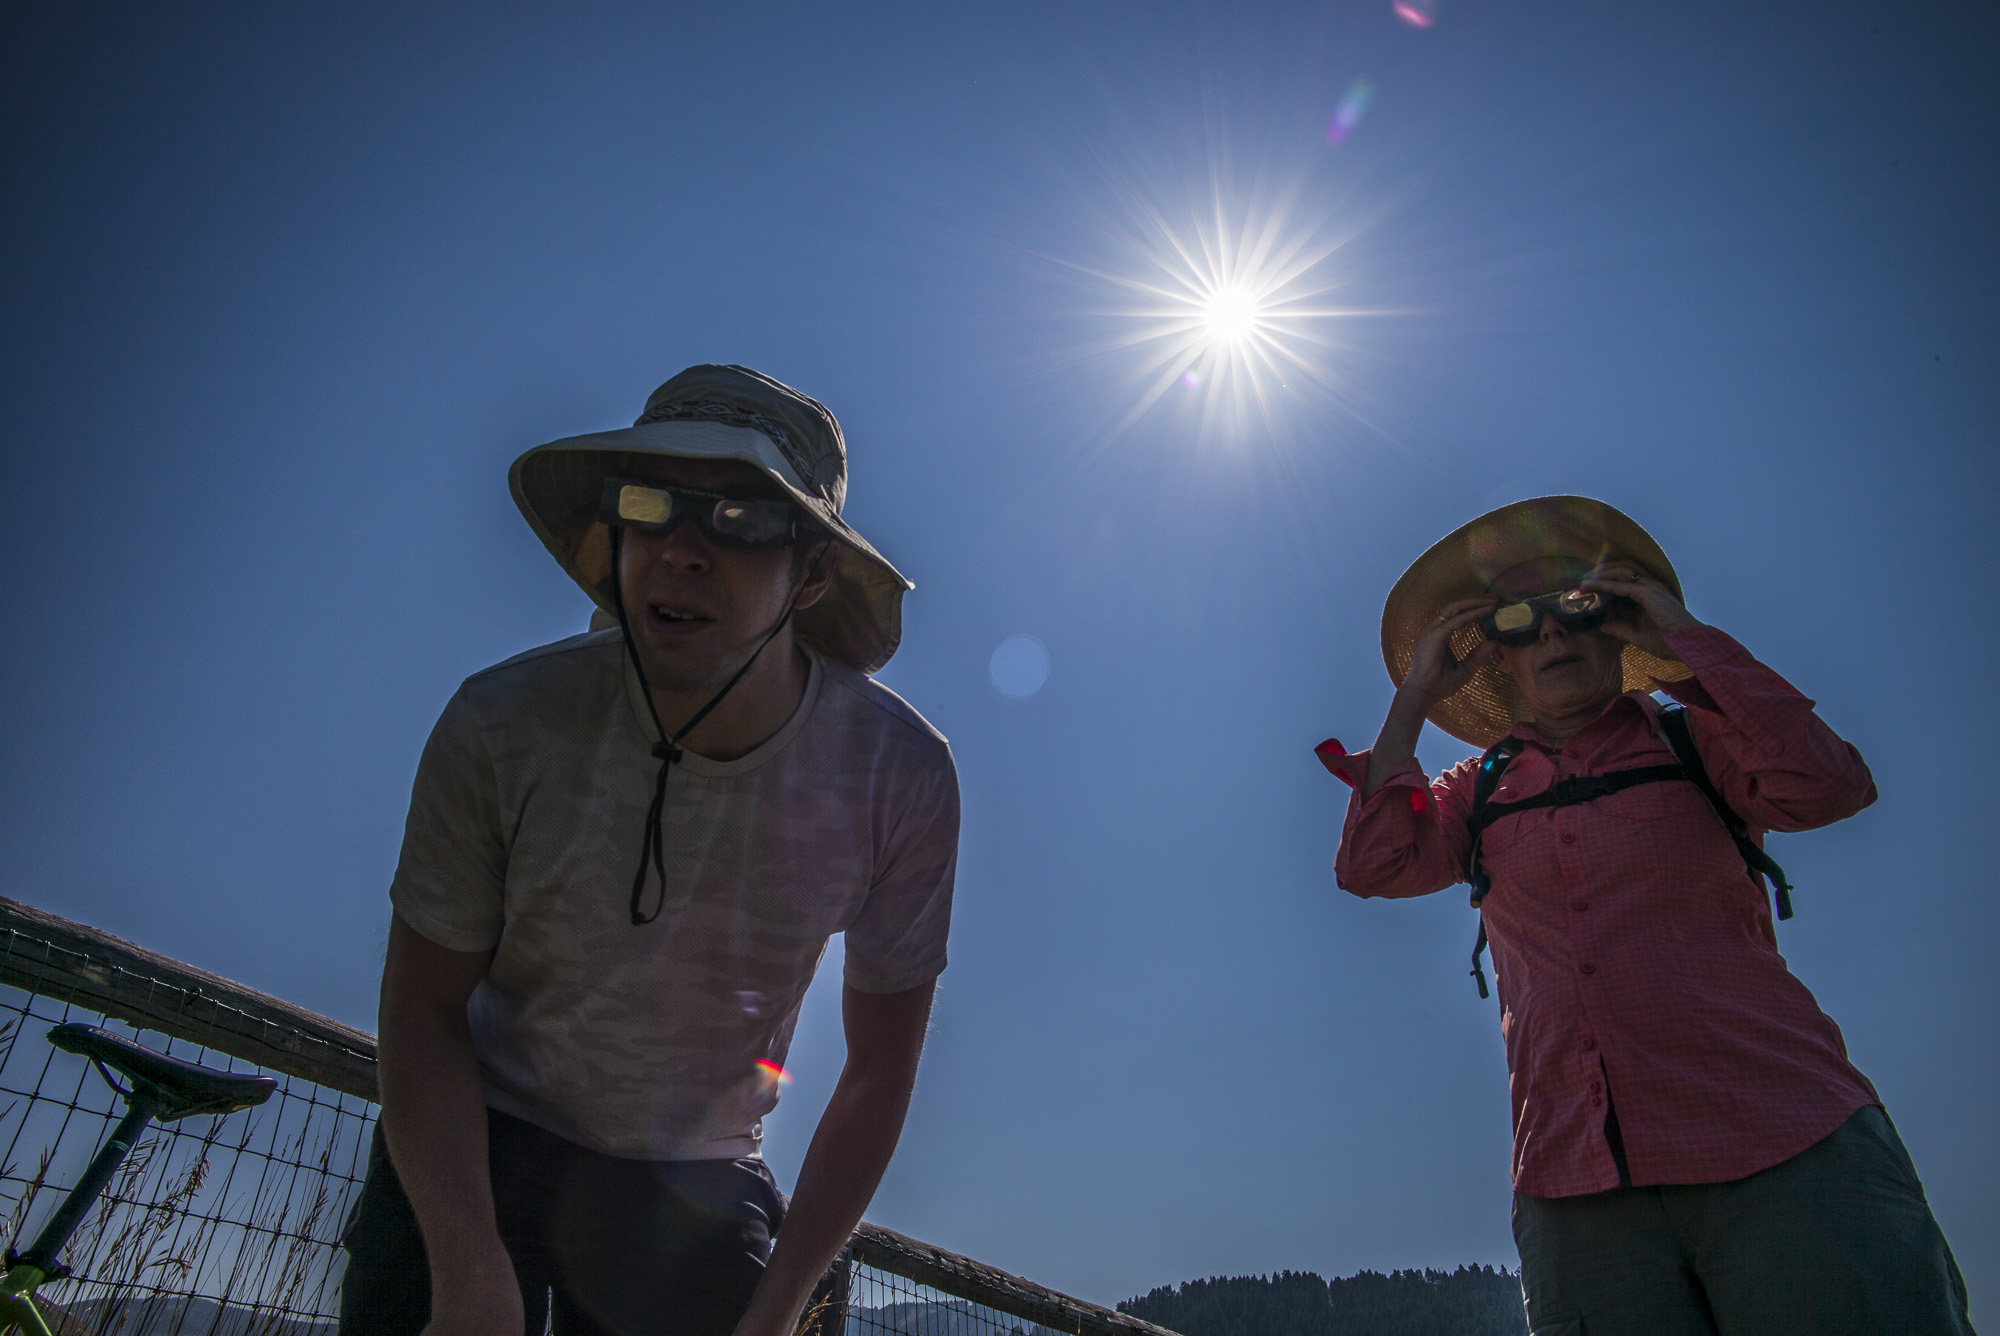 Here is our story of the amazing great American Eclipse as seen from Jackson. https://www.travelisbeautiful.com/blog/eclipse